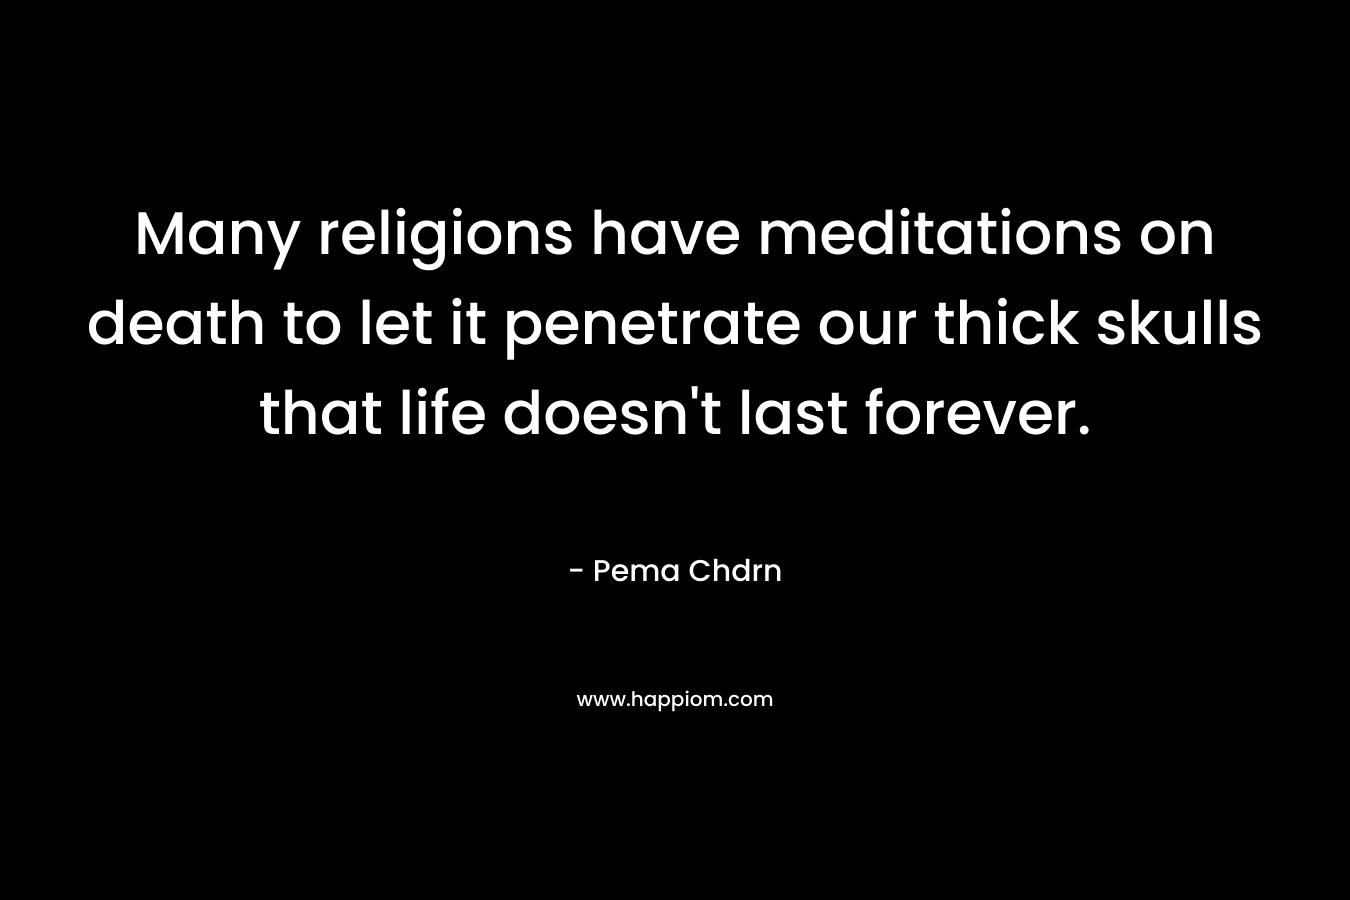 Many religions have meditations on death to let it penetrate our thick skulls that life doesn't last forever.